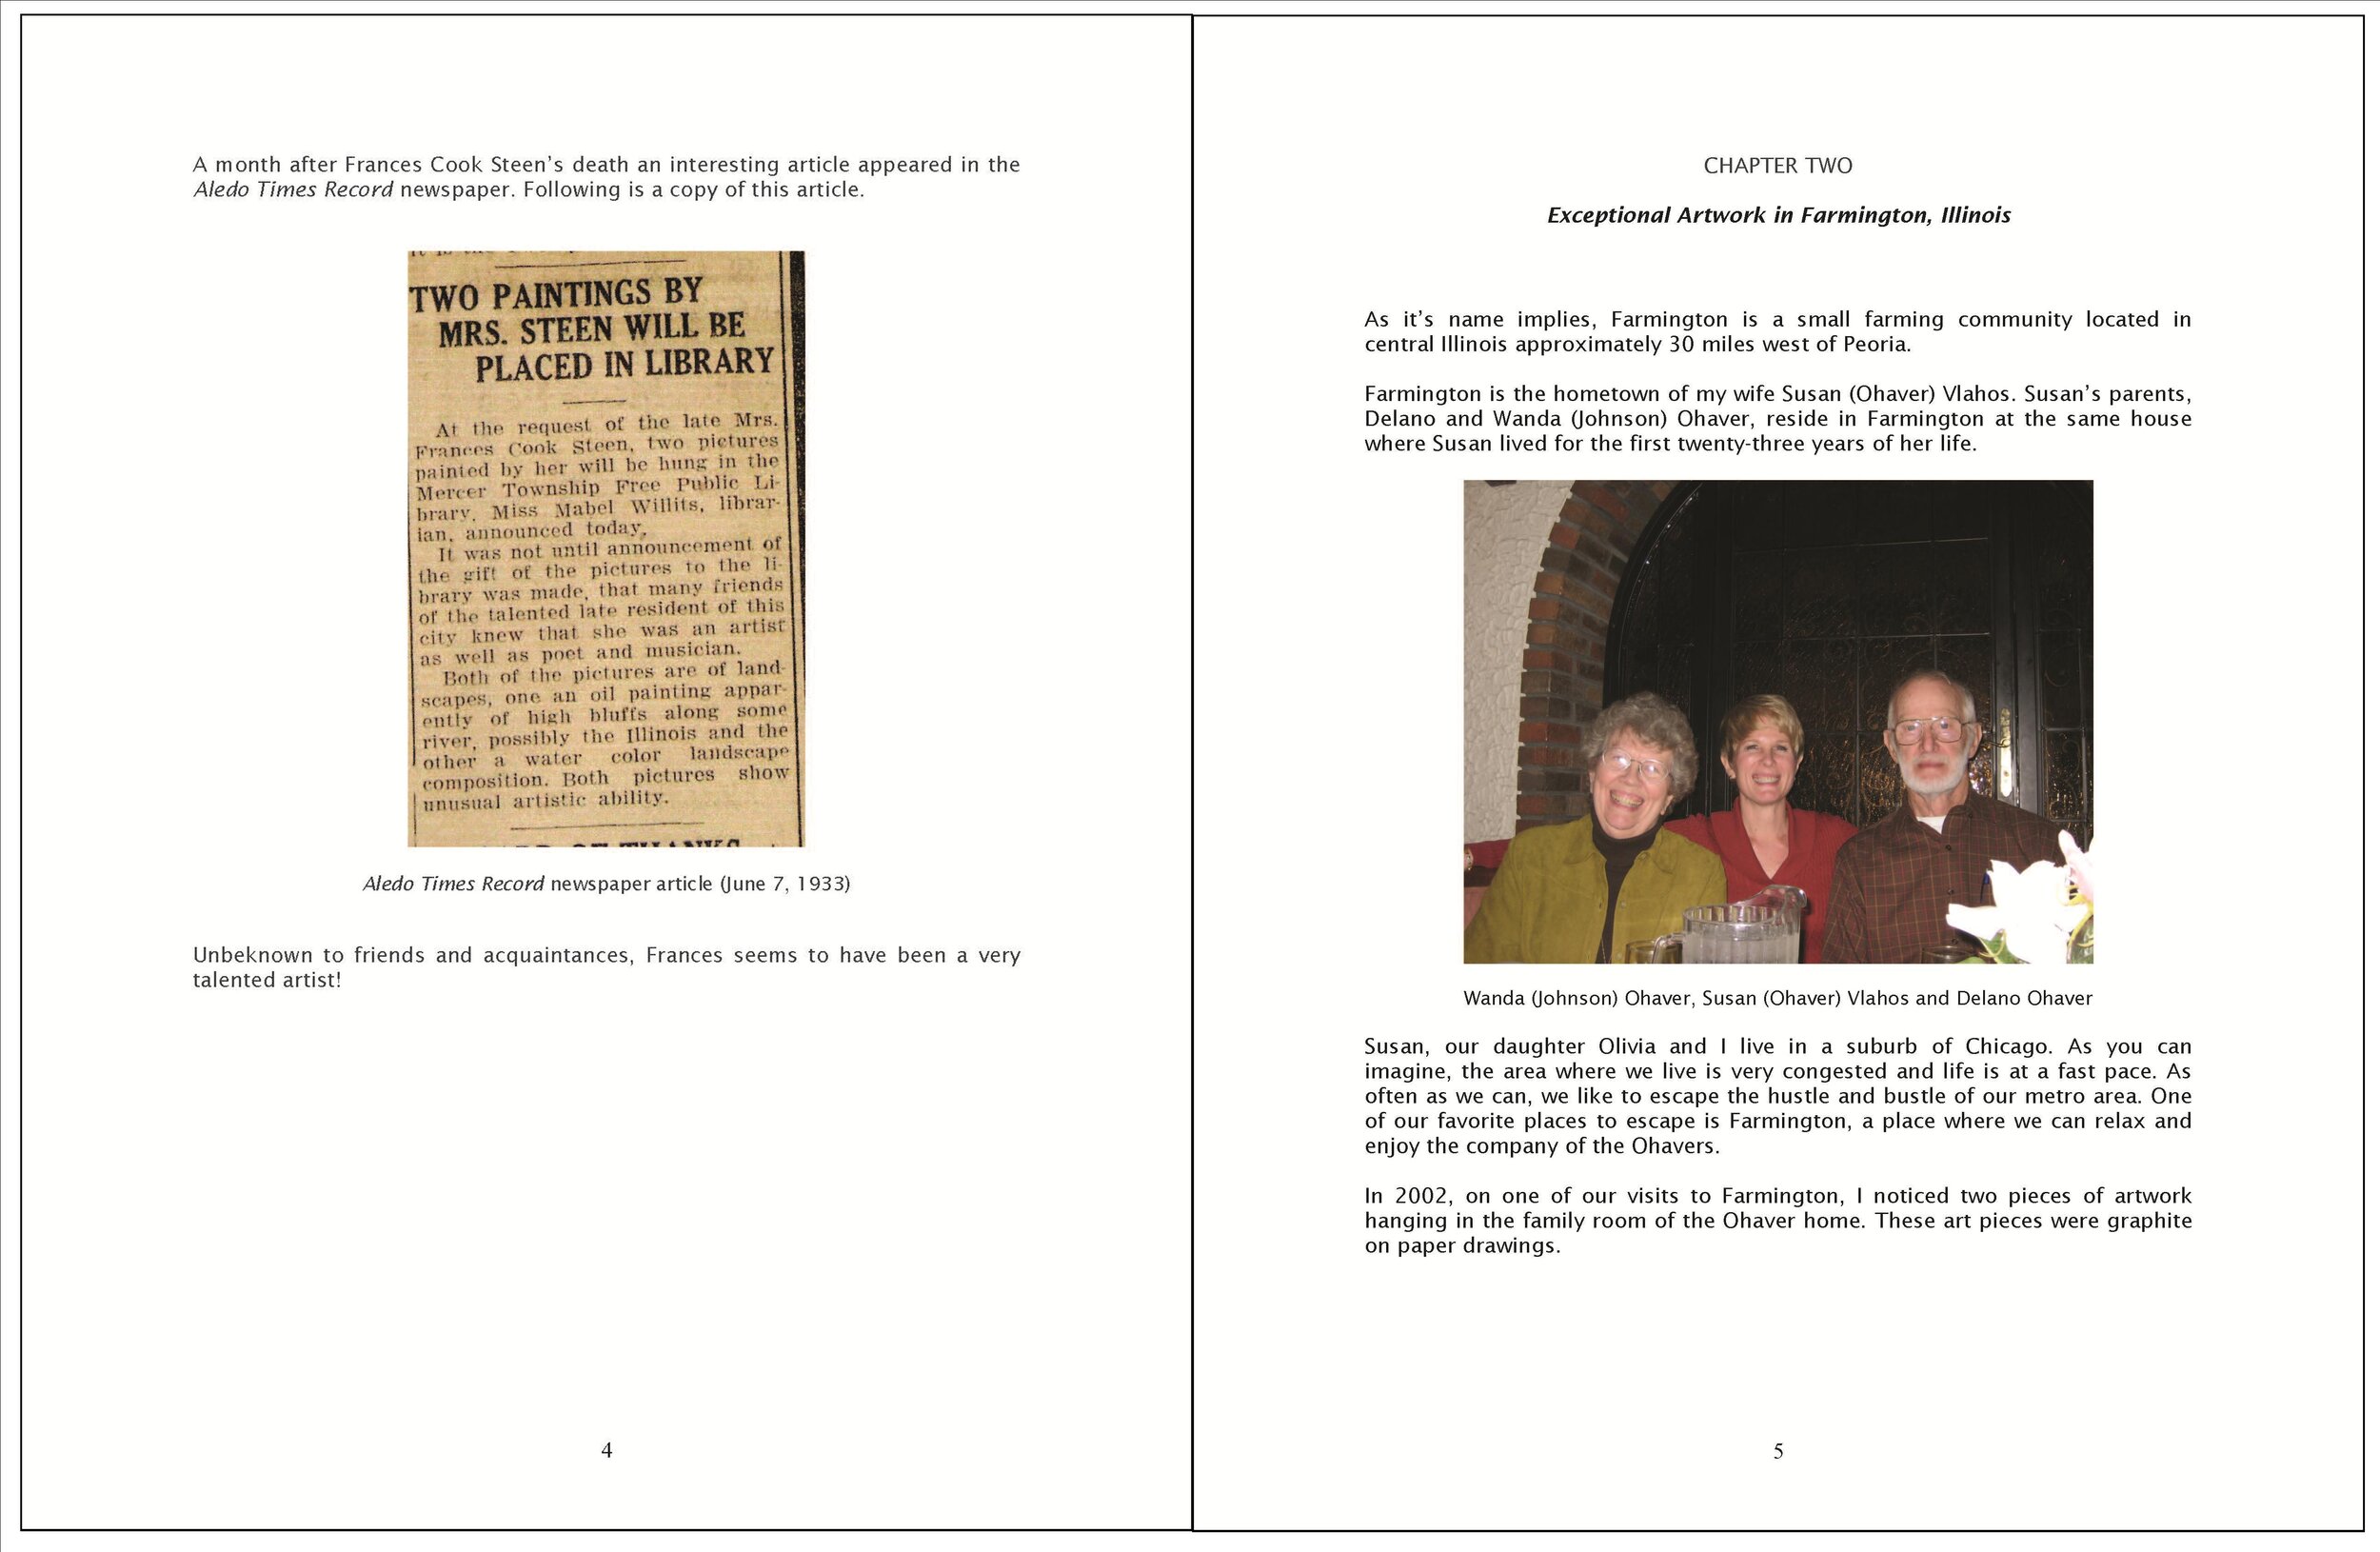 Pages 4 & 5.jpg